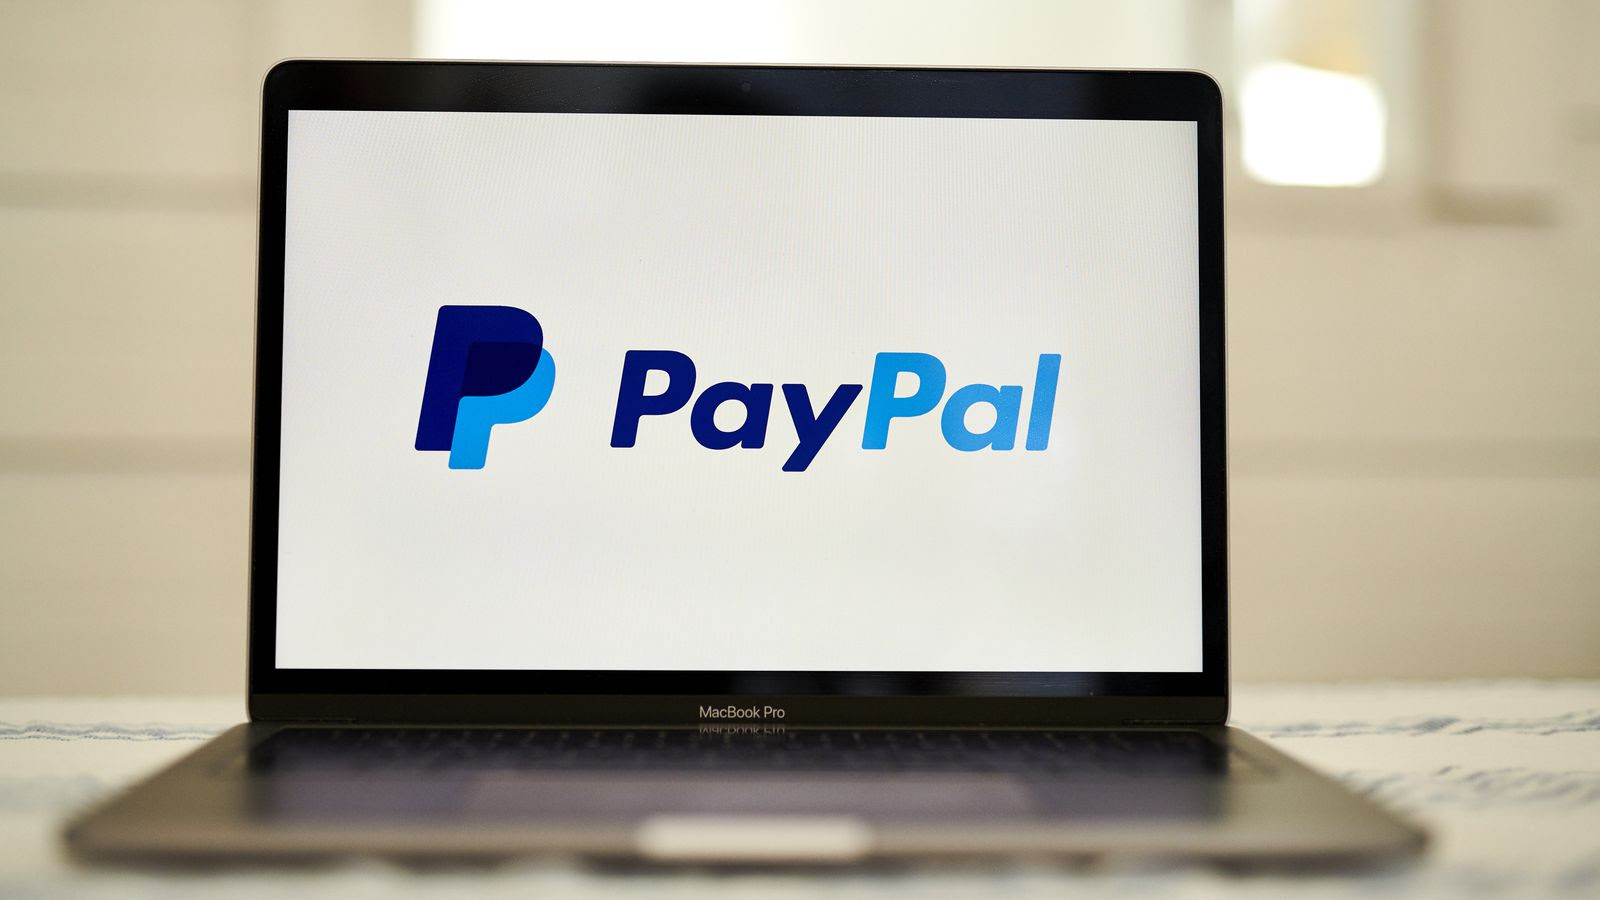 PayPal won't fine users for misinformation posts, policy posted “in error”